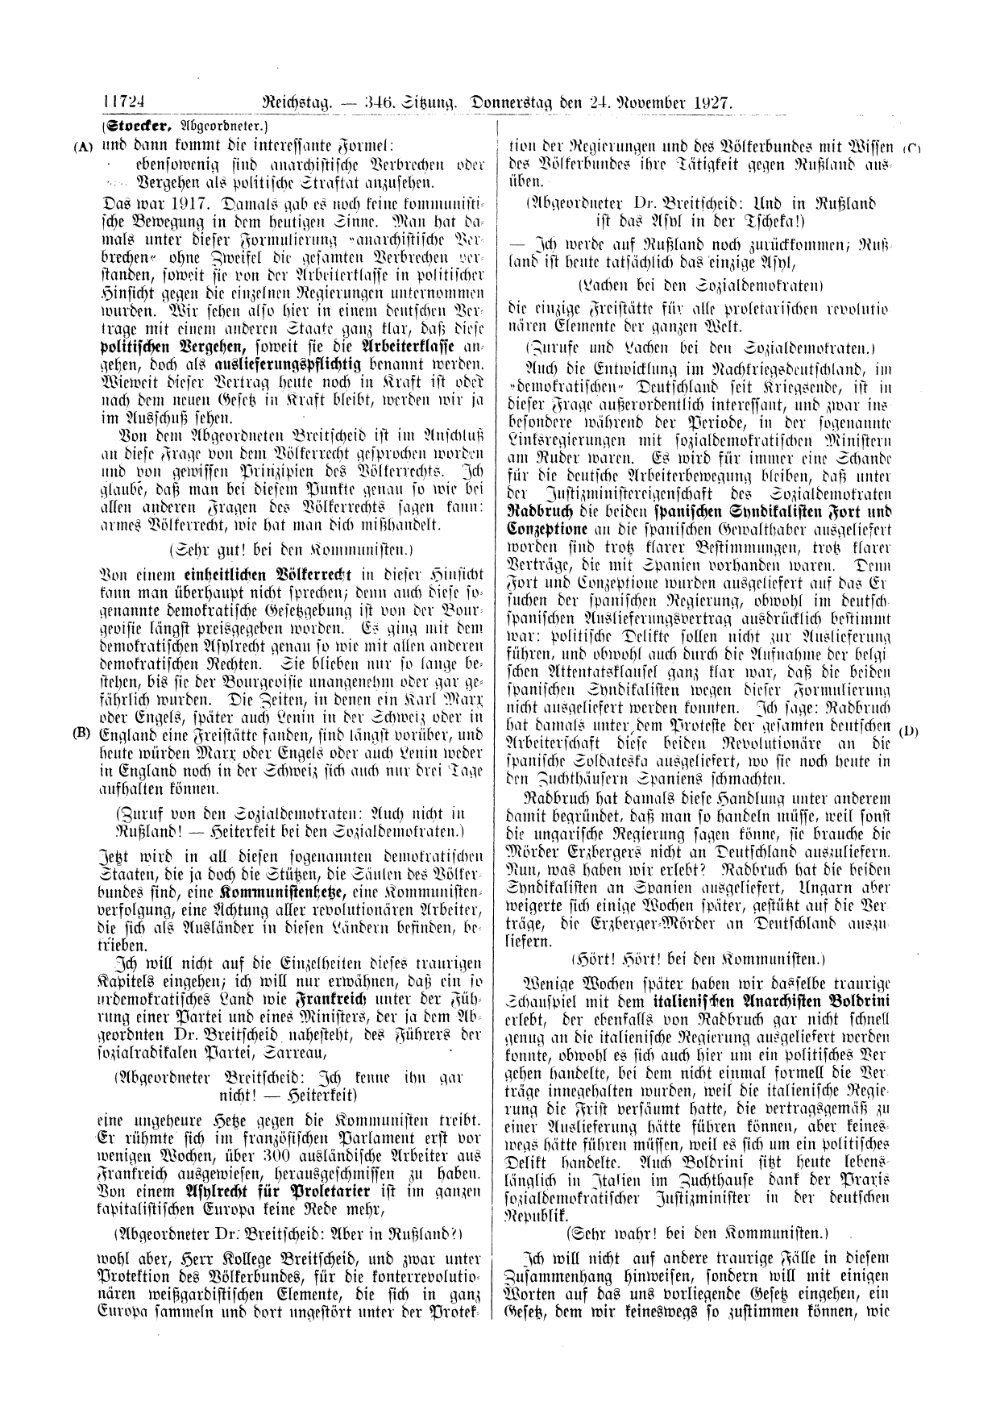 Scan of page 11724